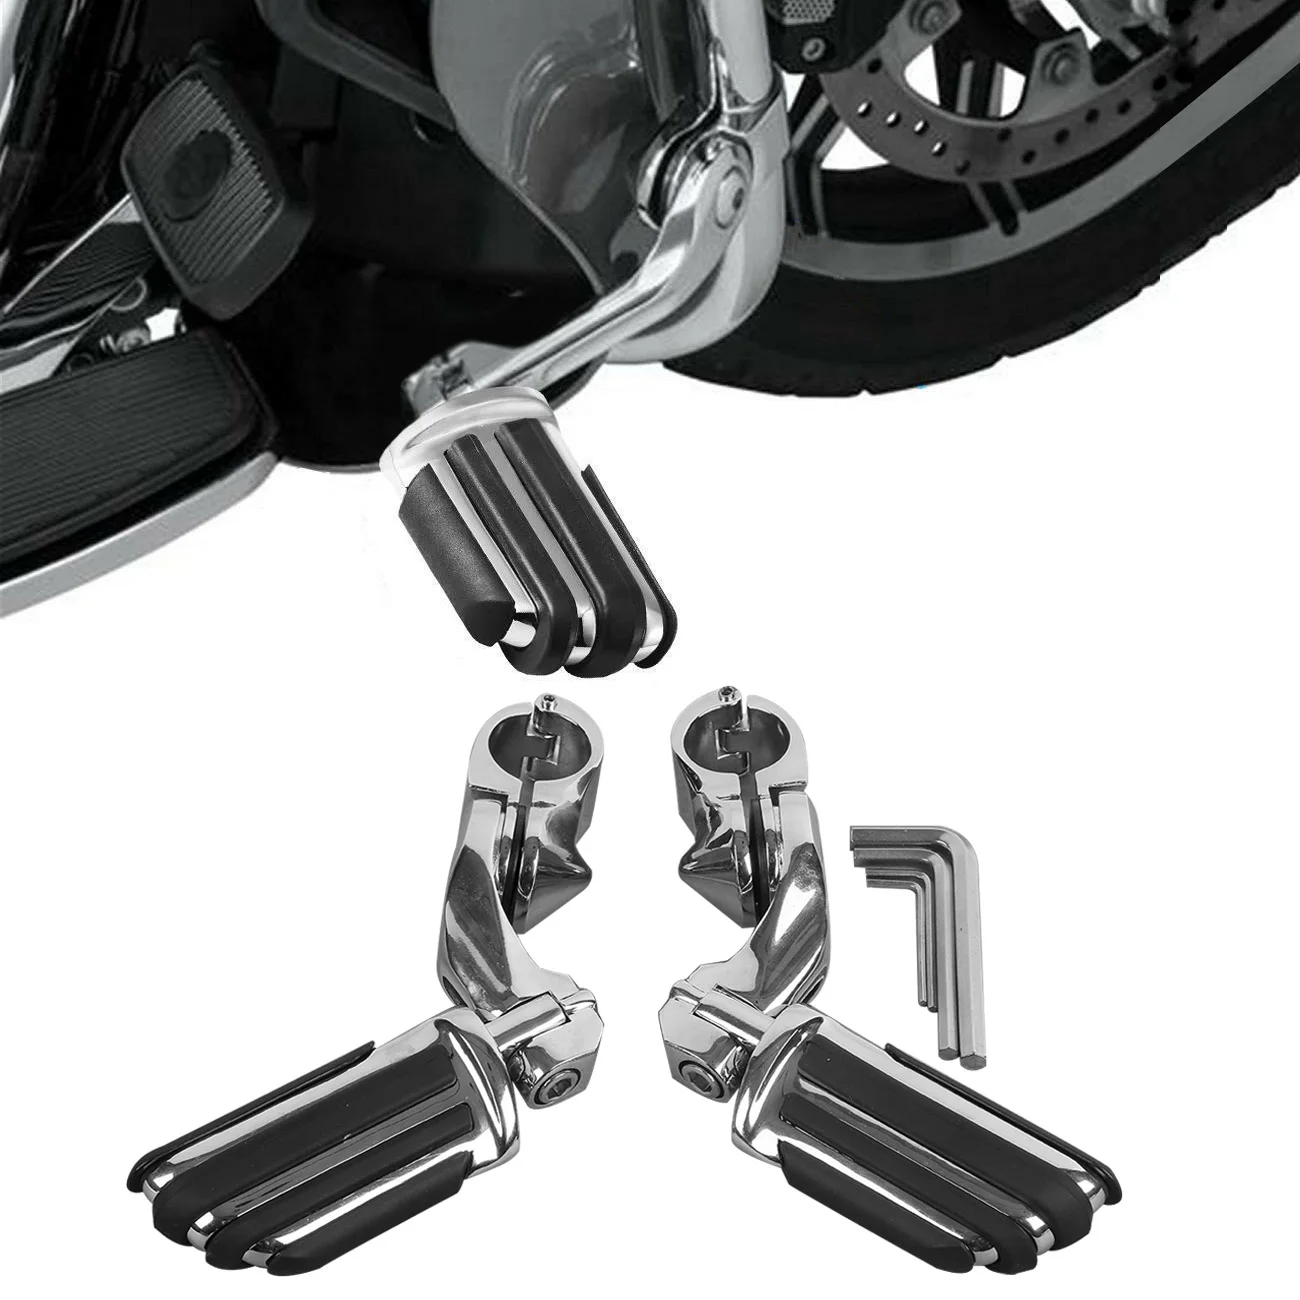 

1-1/4" 32mm Short Angled Highway Bar Footpegs Pegs Mount For Harley Touring Road King Glide Sportster 883 1200 FLHT FLHX FLHR